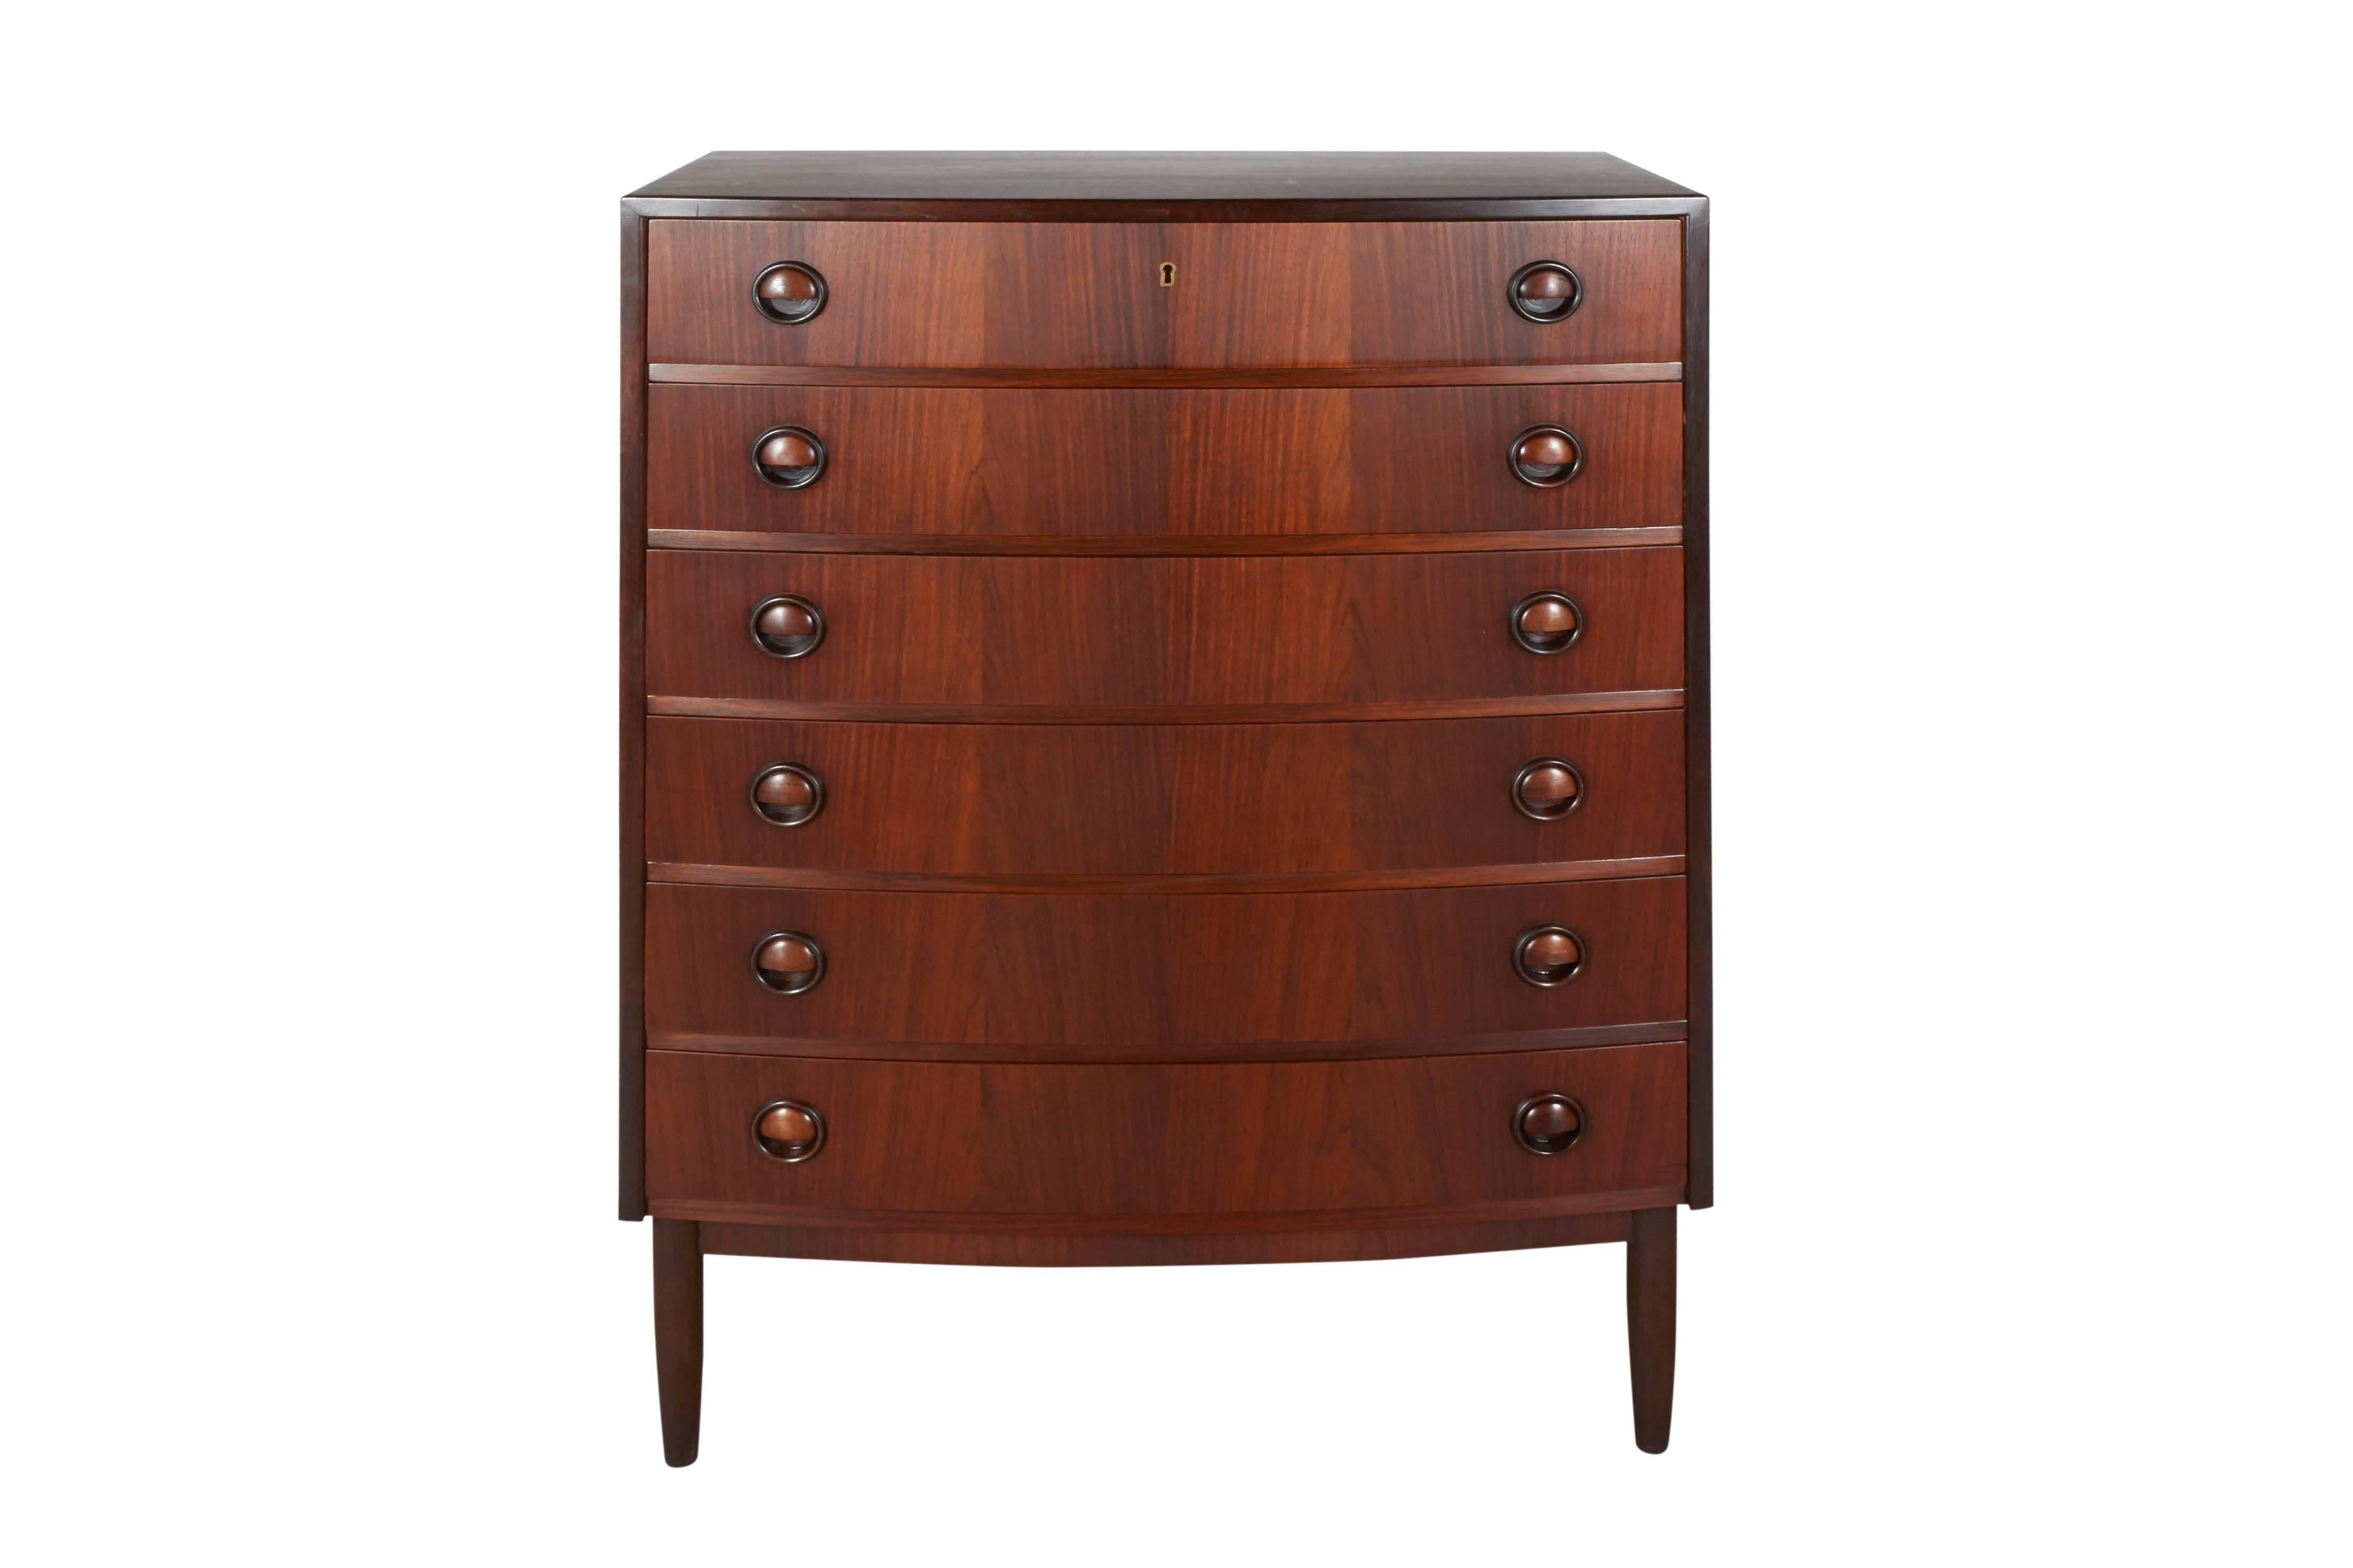 Vintage 1960s Danish Rosewood Dresser

This mid century chest of drawers is in excellent condition. 6 wide drawers makes it great for lots of storage. A lovely bedroom piece or try this piece in a hallway as linen storage, also beautiful in a living